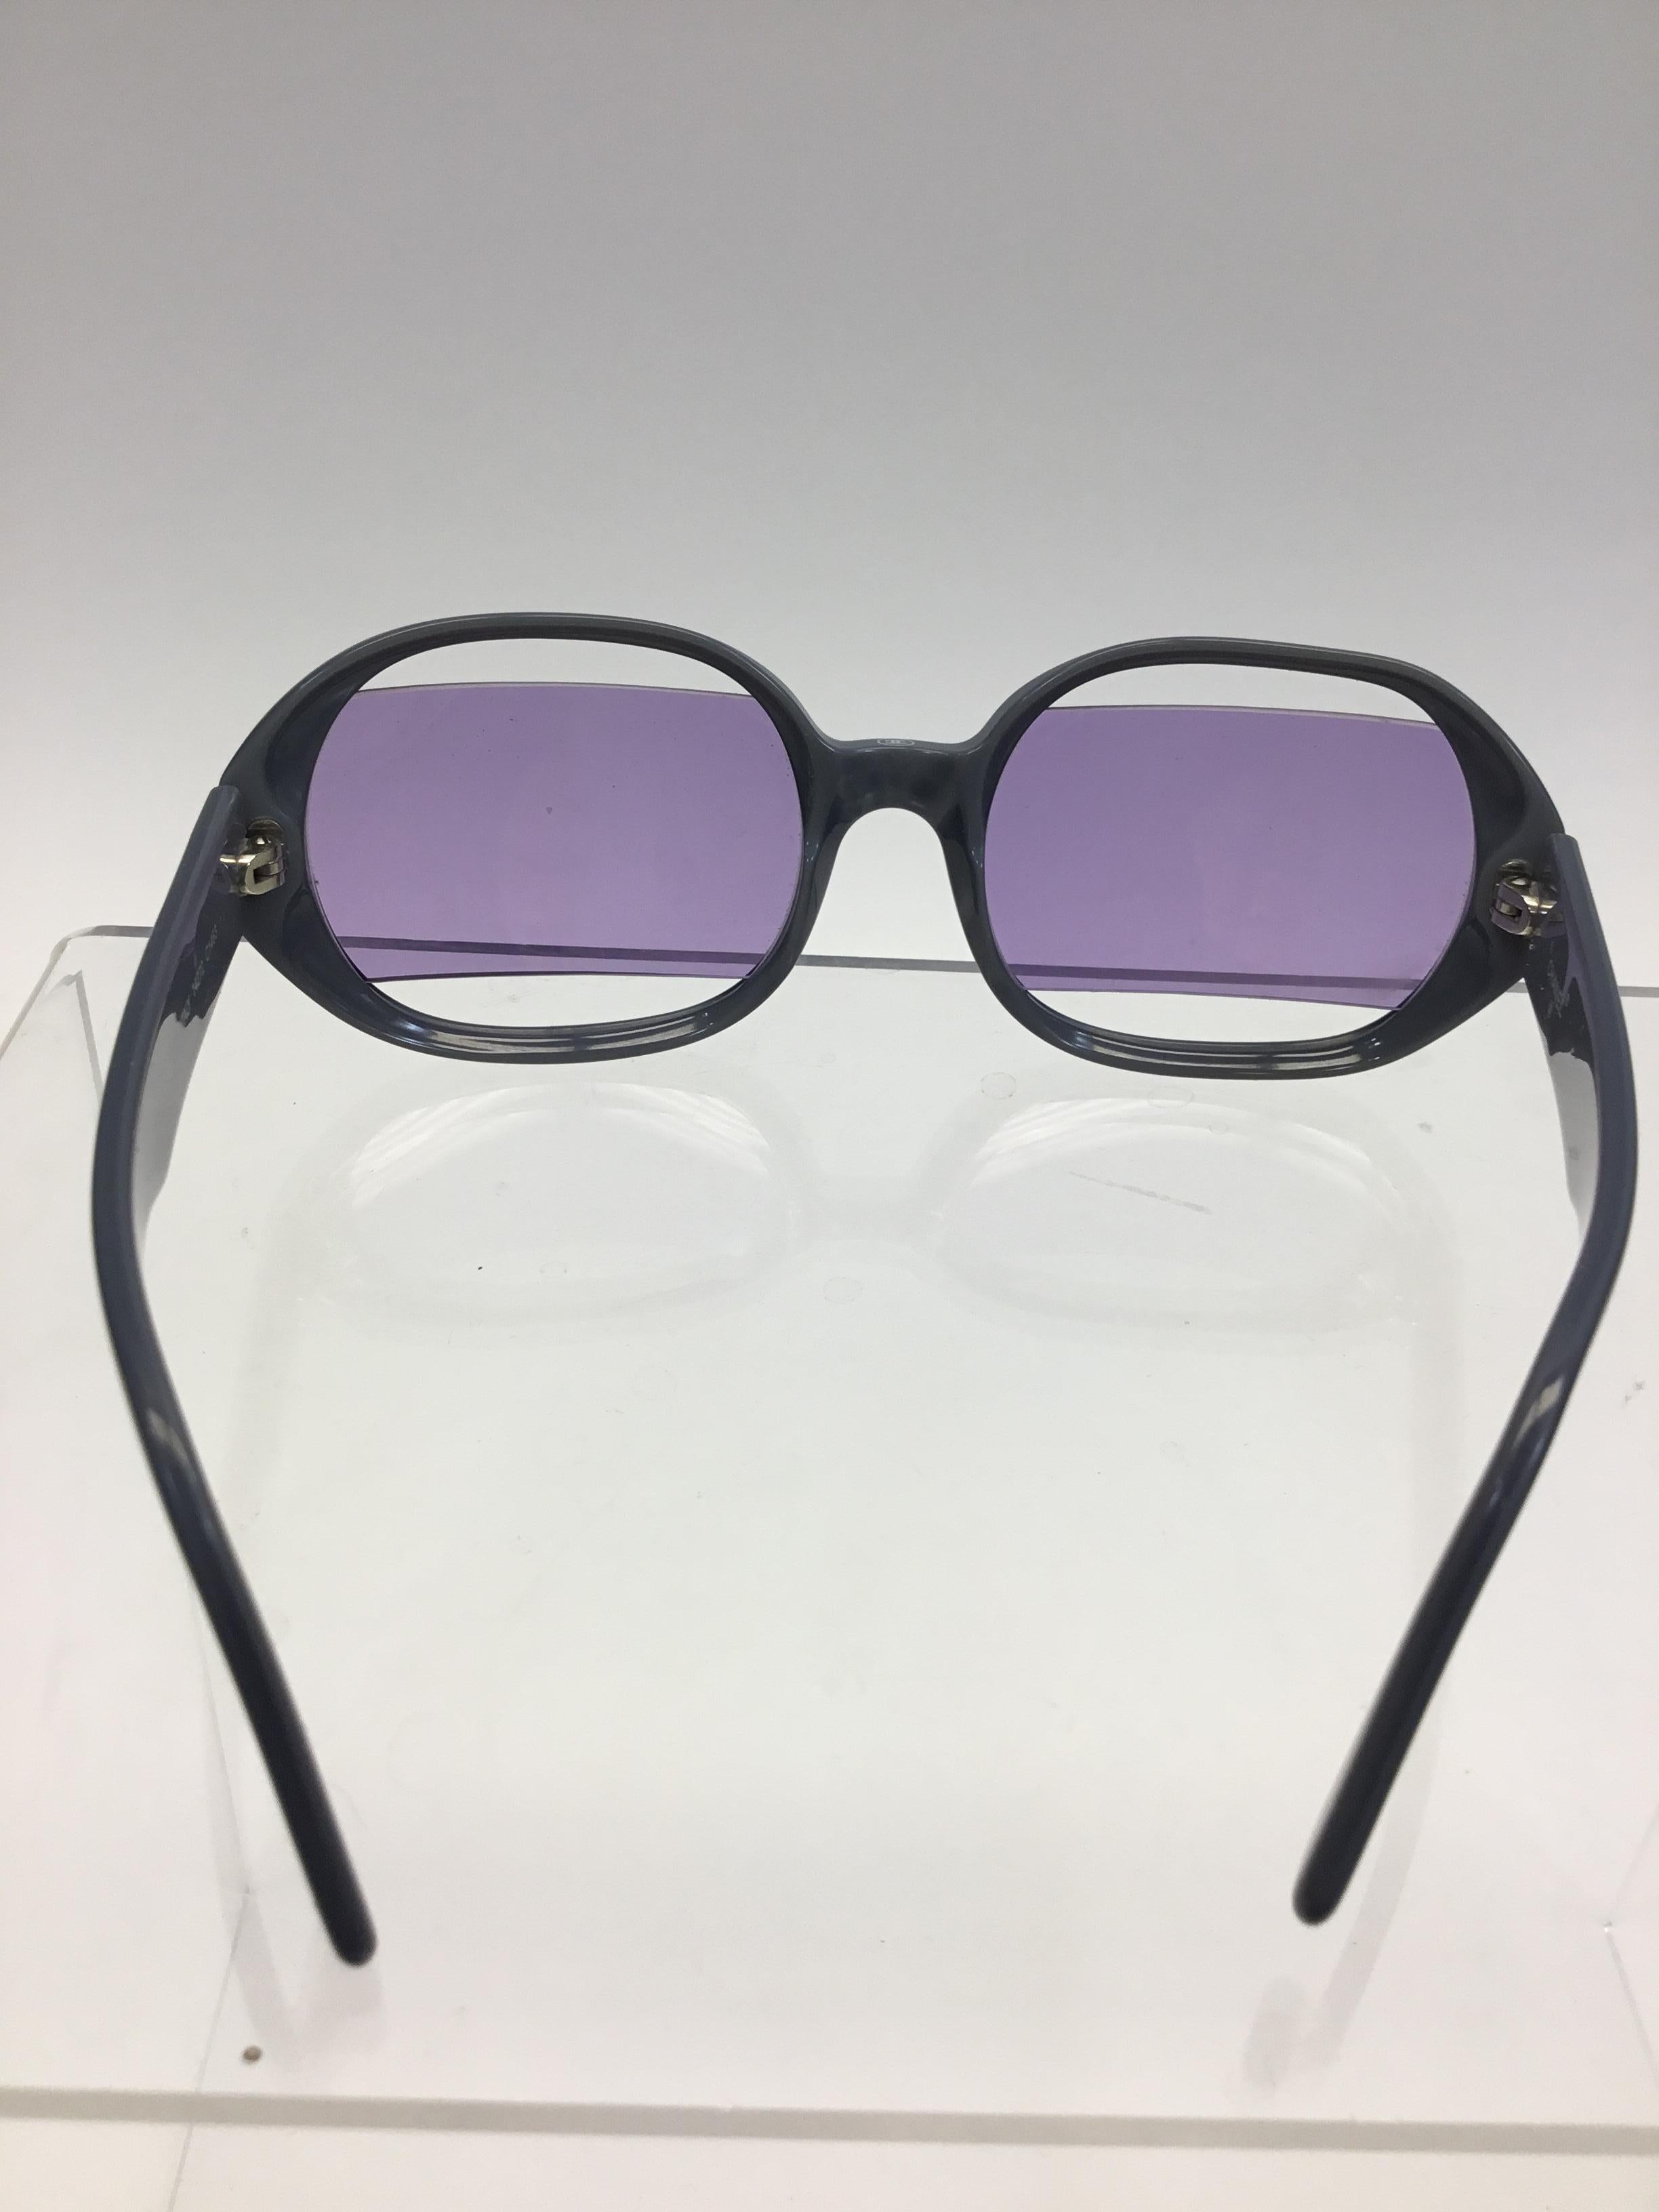 Chanel Light Blue Sunglasses with Purple Lenses In Good Condition For Sale In Narberth, PA